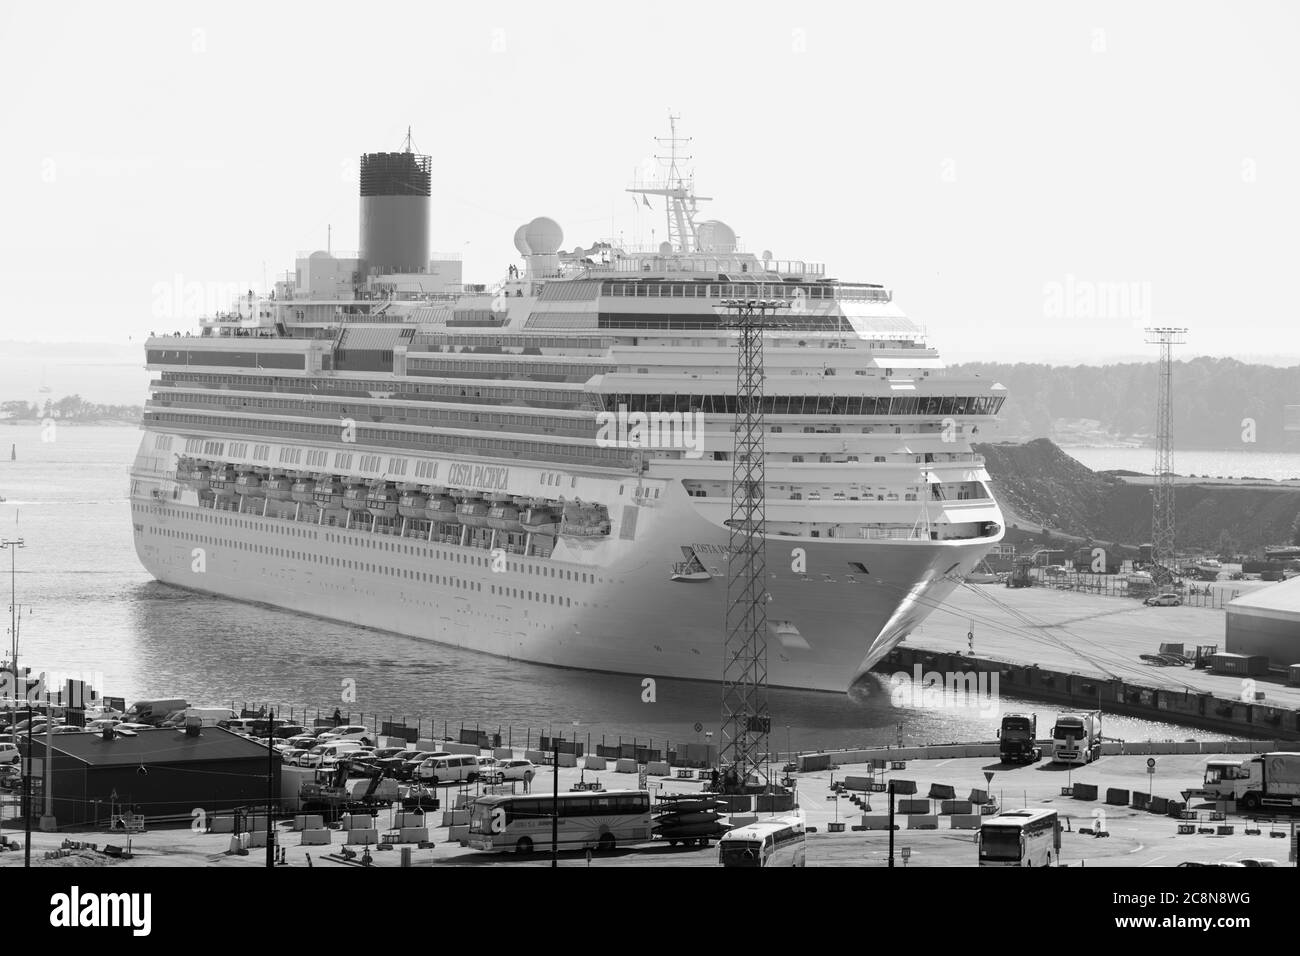 Black and white picture of Costa Pacifica cruise ship at the Melkinlaituri quay, West Terminal of Helsinki, Finland Stock Photo